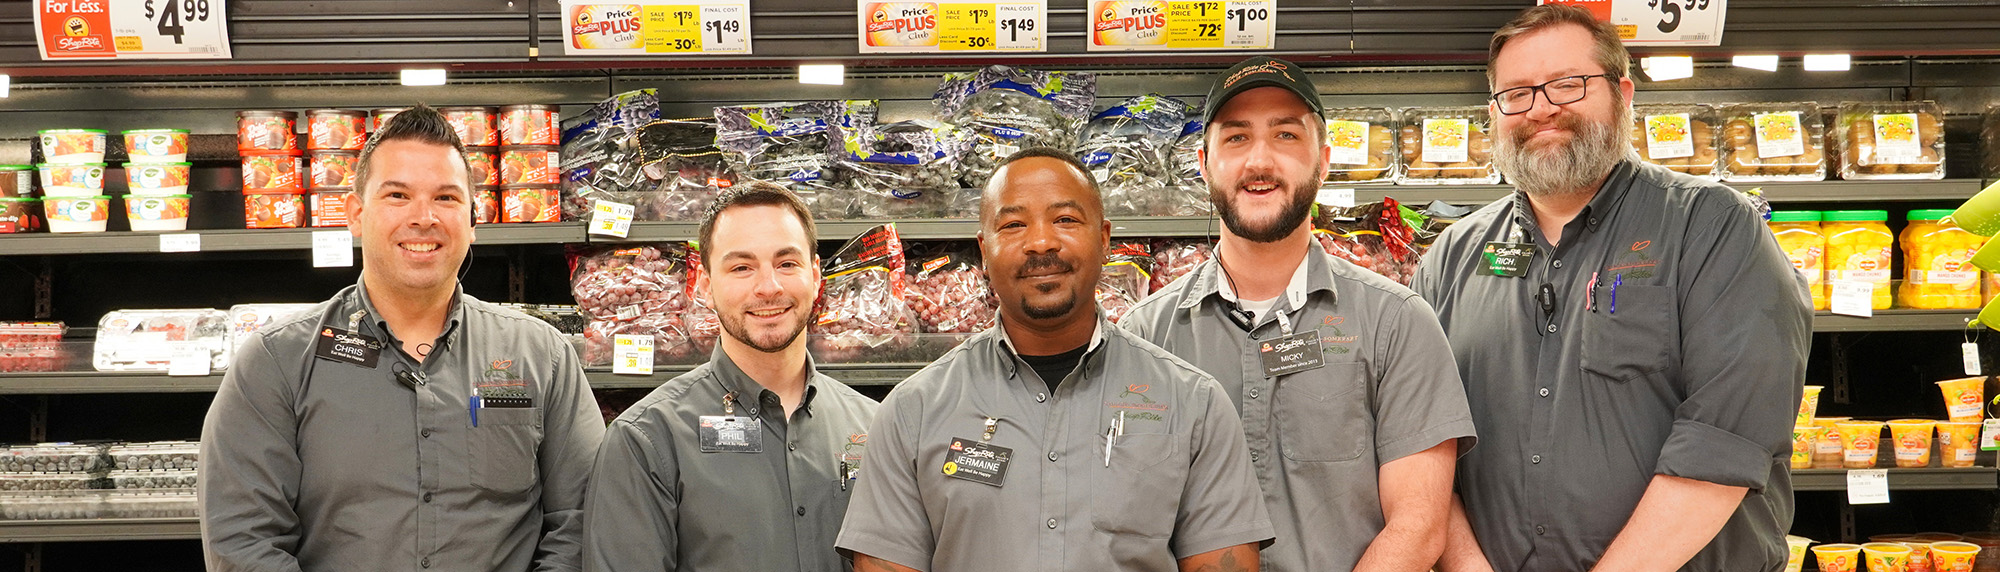 Laurel Hill Store Managers